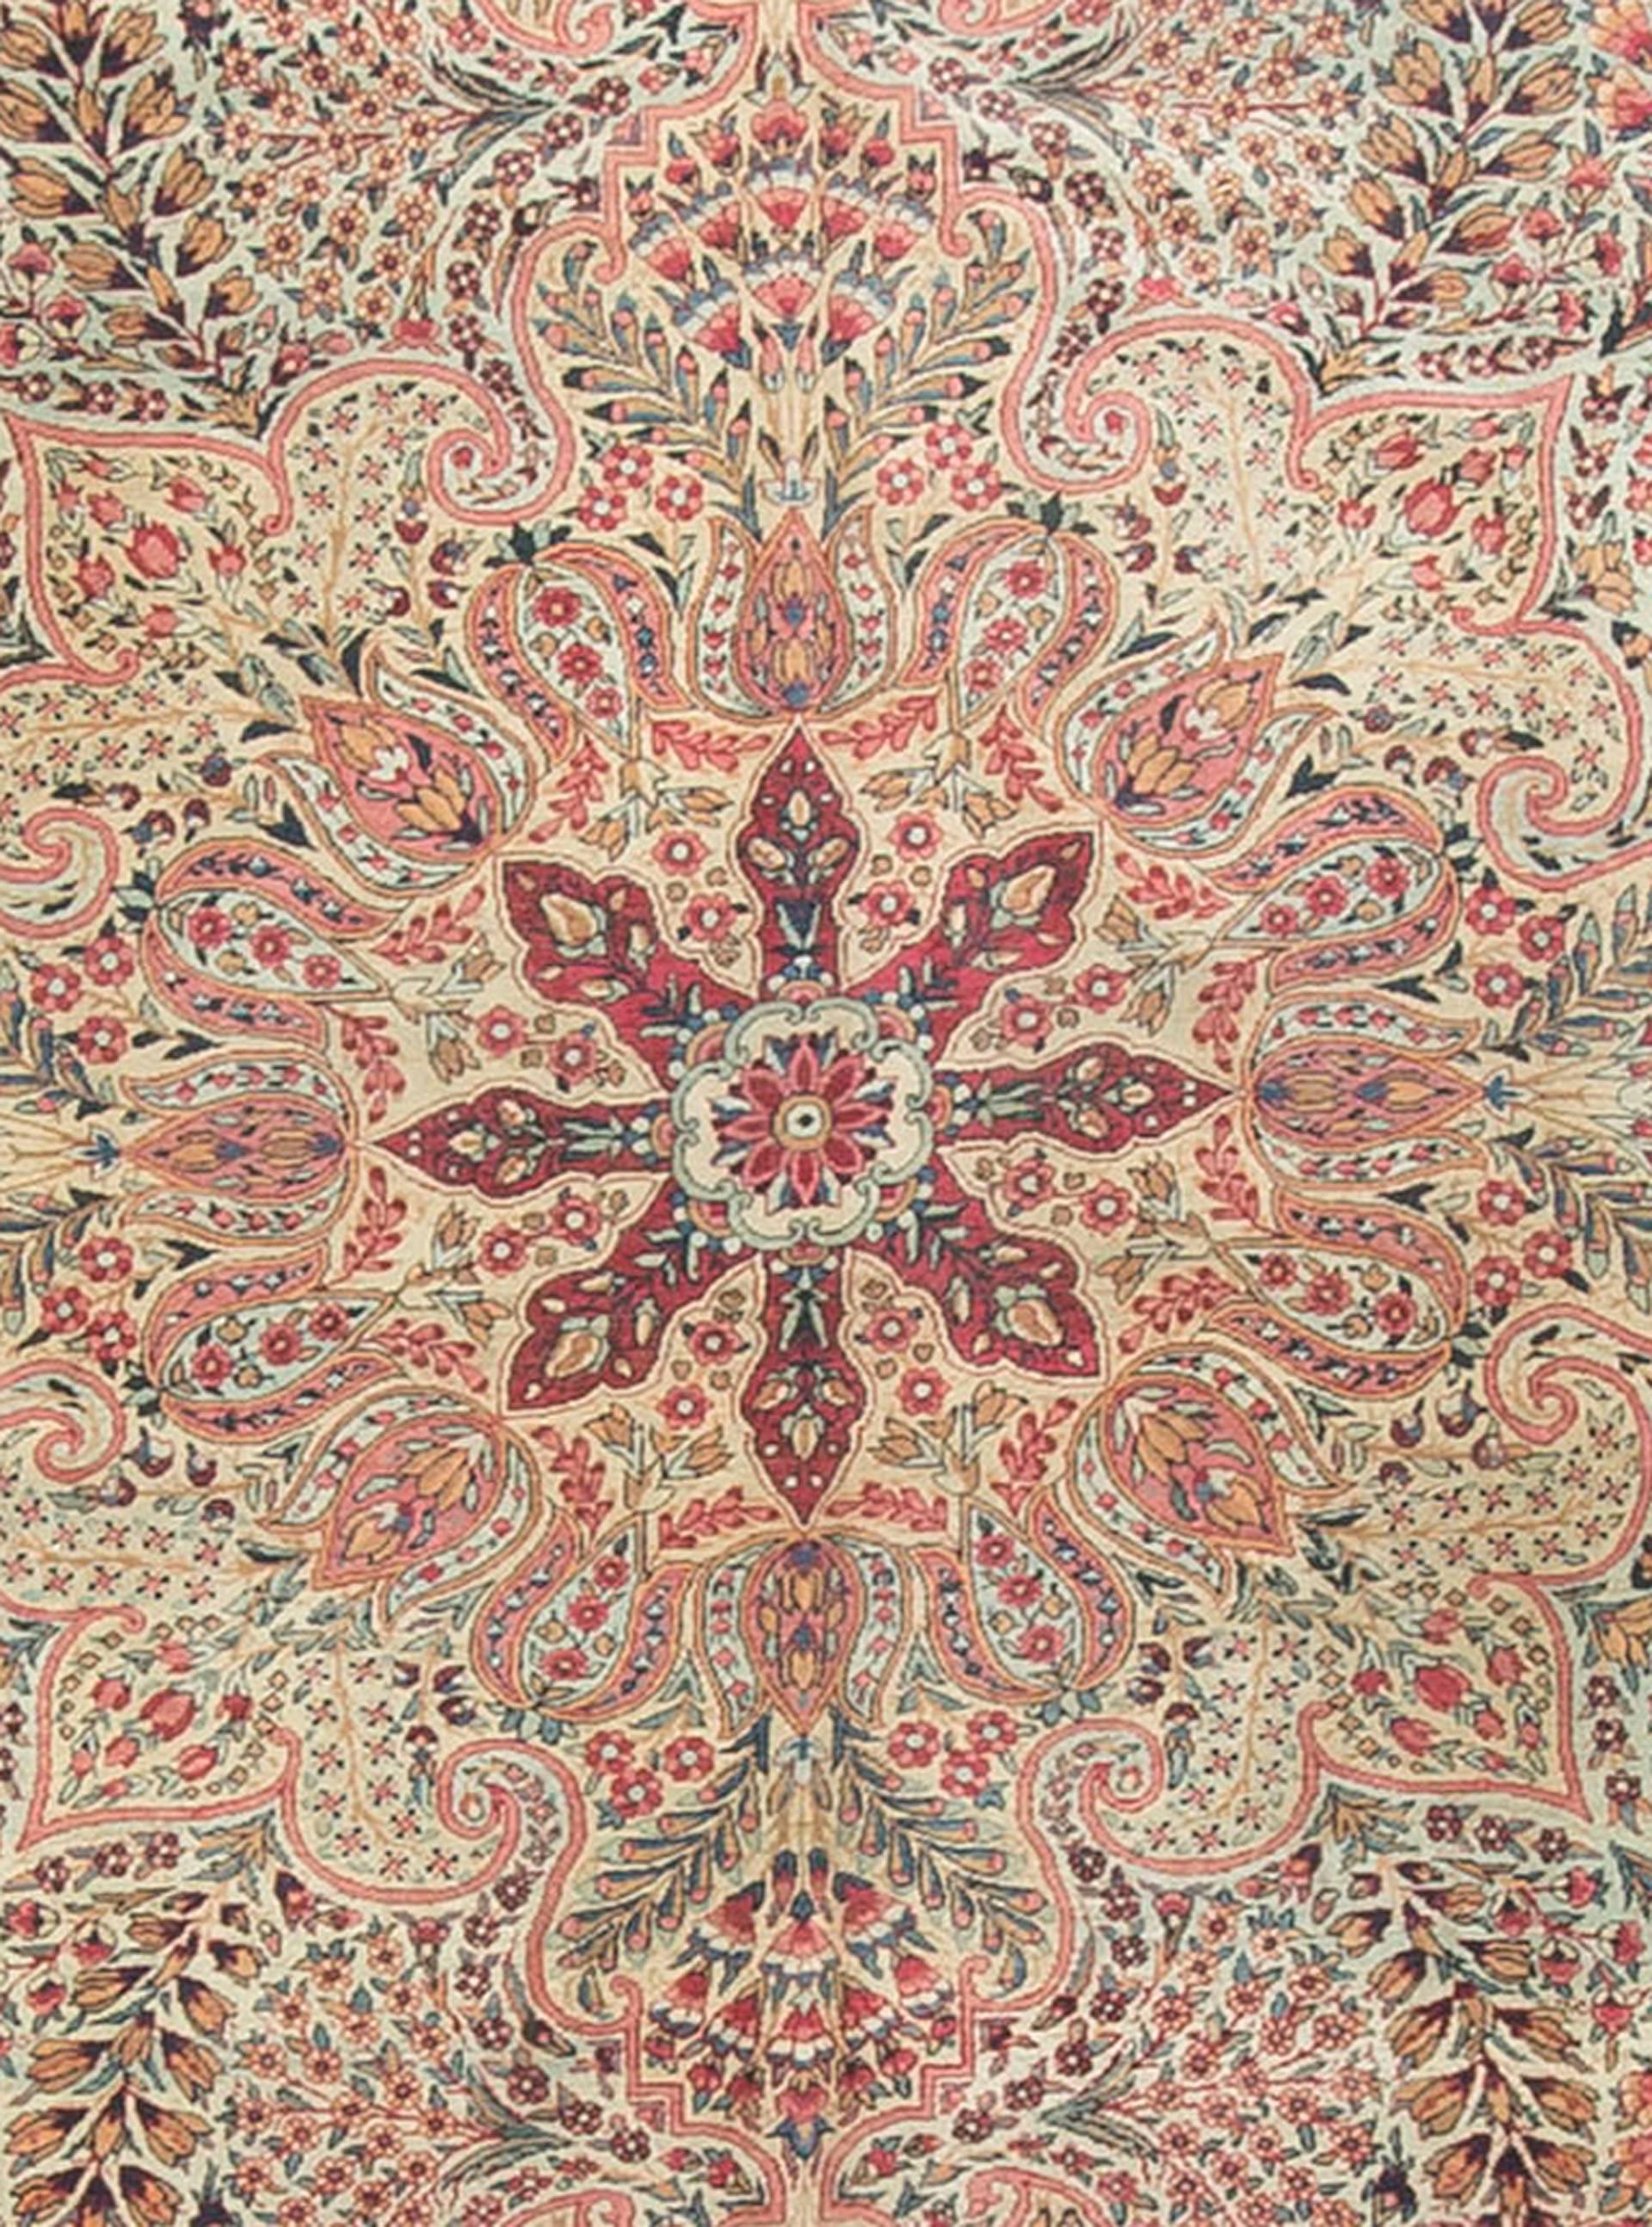 An antique Persian Kerman rug, circa 1900. The wonderful field design of intricate floral patterns creates an impression that it is swirling out from the centre medallion with the corner spandrels in the same style anchoring the design into place.